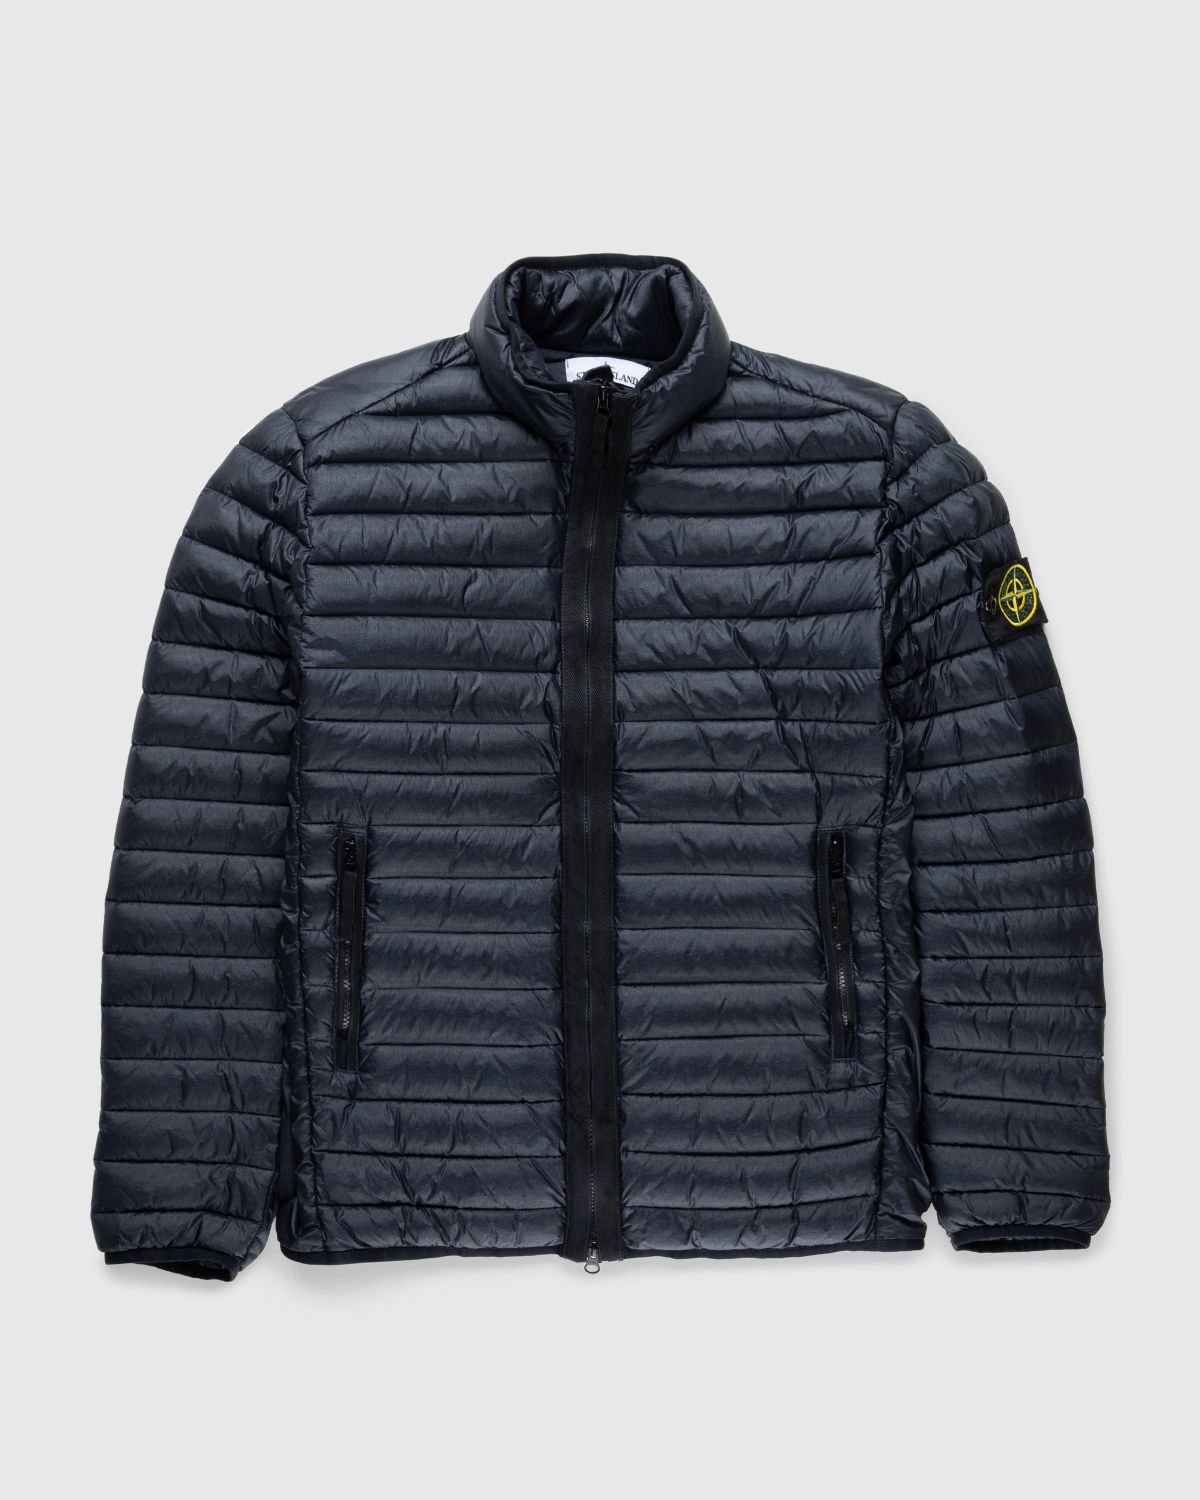 Stone Island – Packable Recycled Nylon Down Jacket Navy Blue - Outerwear - Blue - Image 1